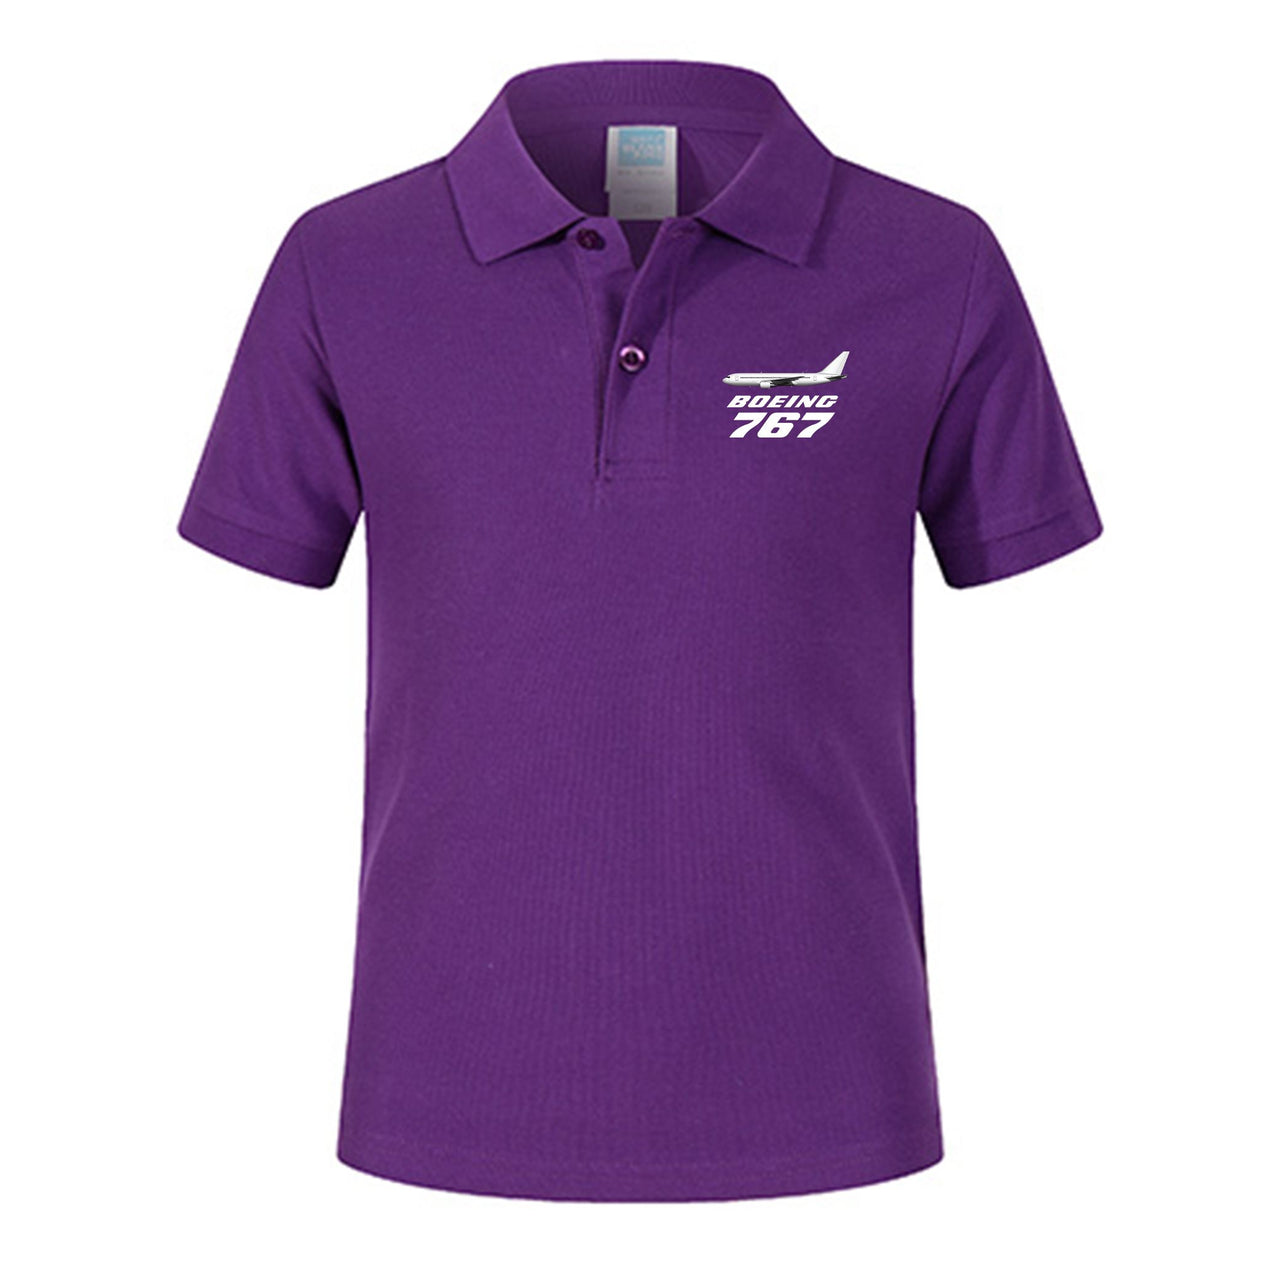 The Boeing 767 Designed Children Polo T-Shirts